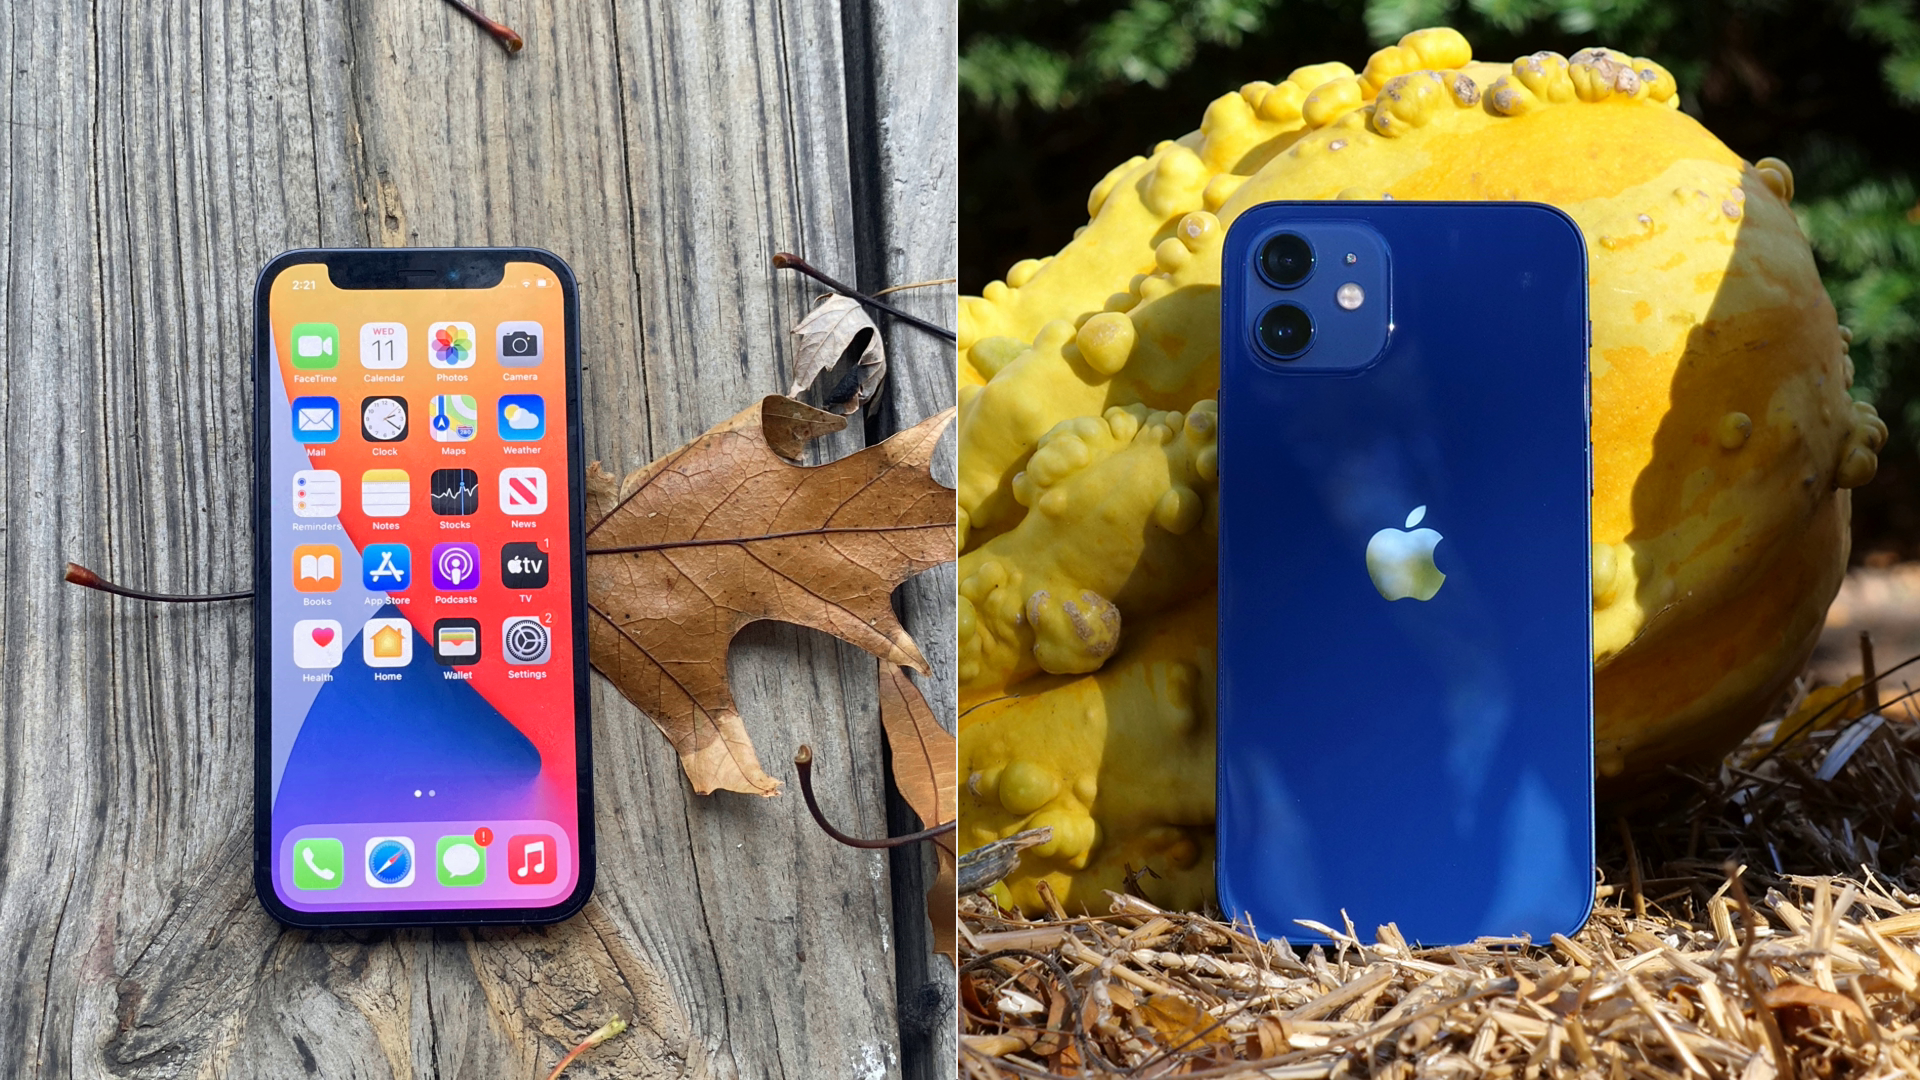 iPhone 12 mini vs. iPhone 12: The winner will surprise you